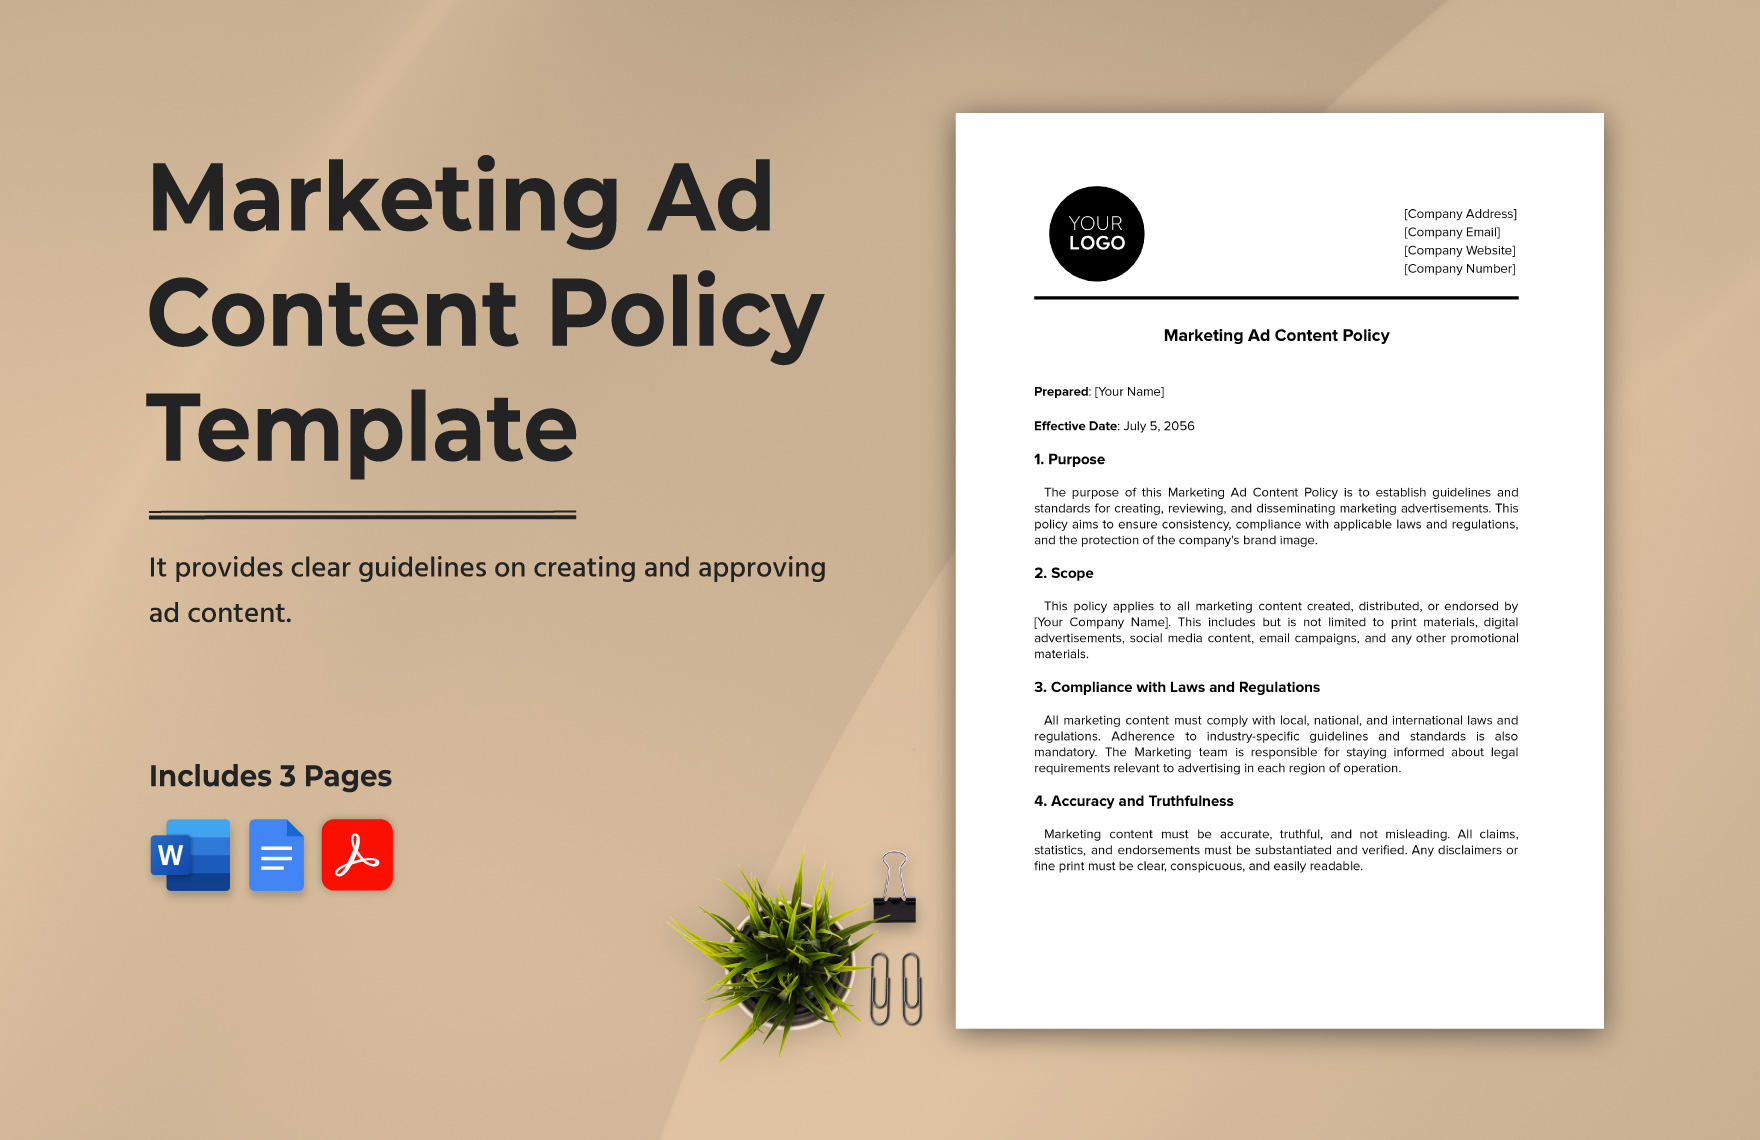 Marketing Ad Content Policy Template in Word, Google Docs, PDF